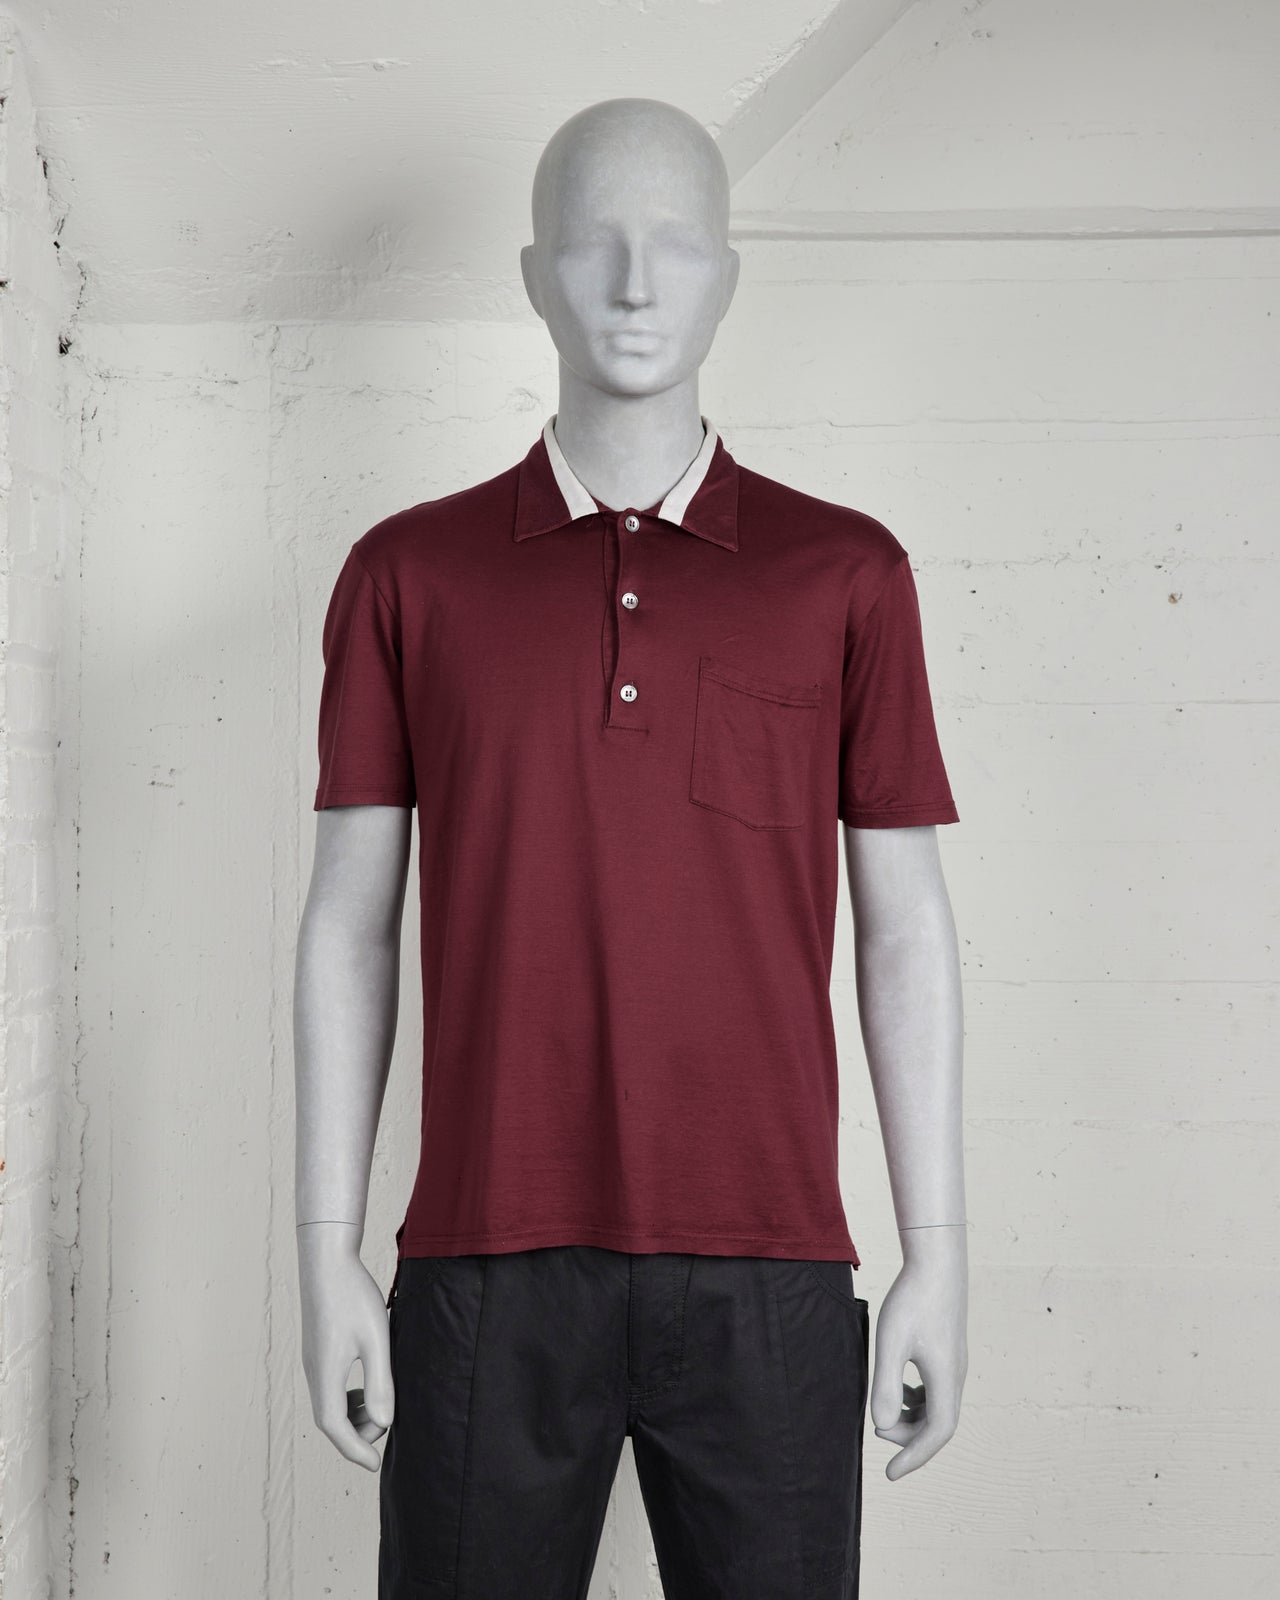 Helmut Lang Red Polo Shirt W/ Striped Collar front